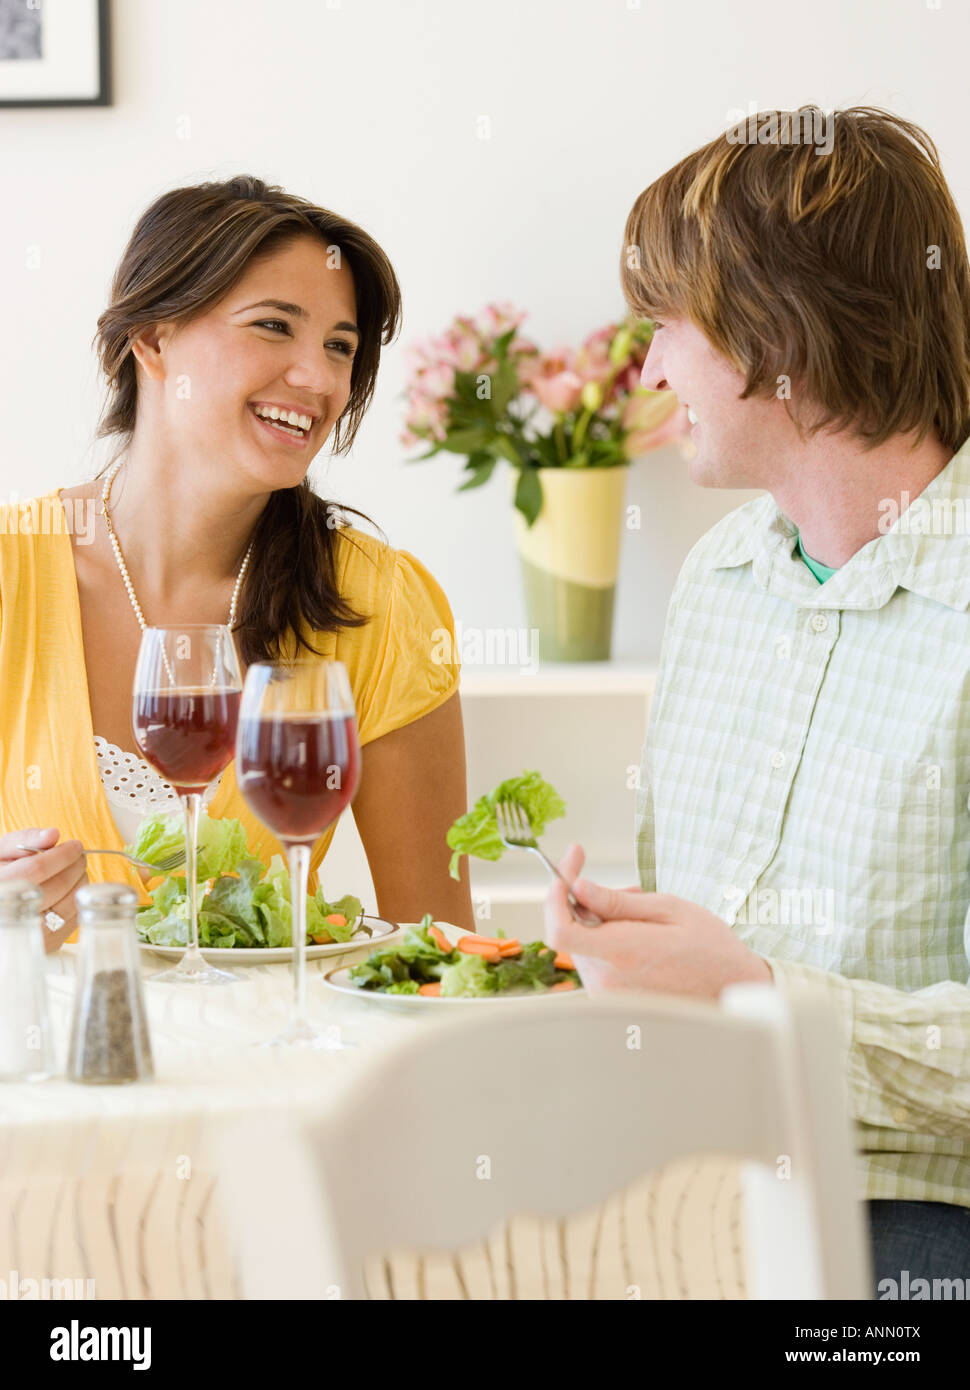 Couple eating at restaurant Stock Photo